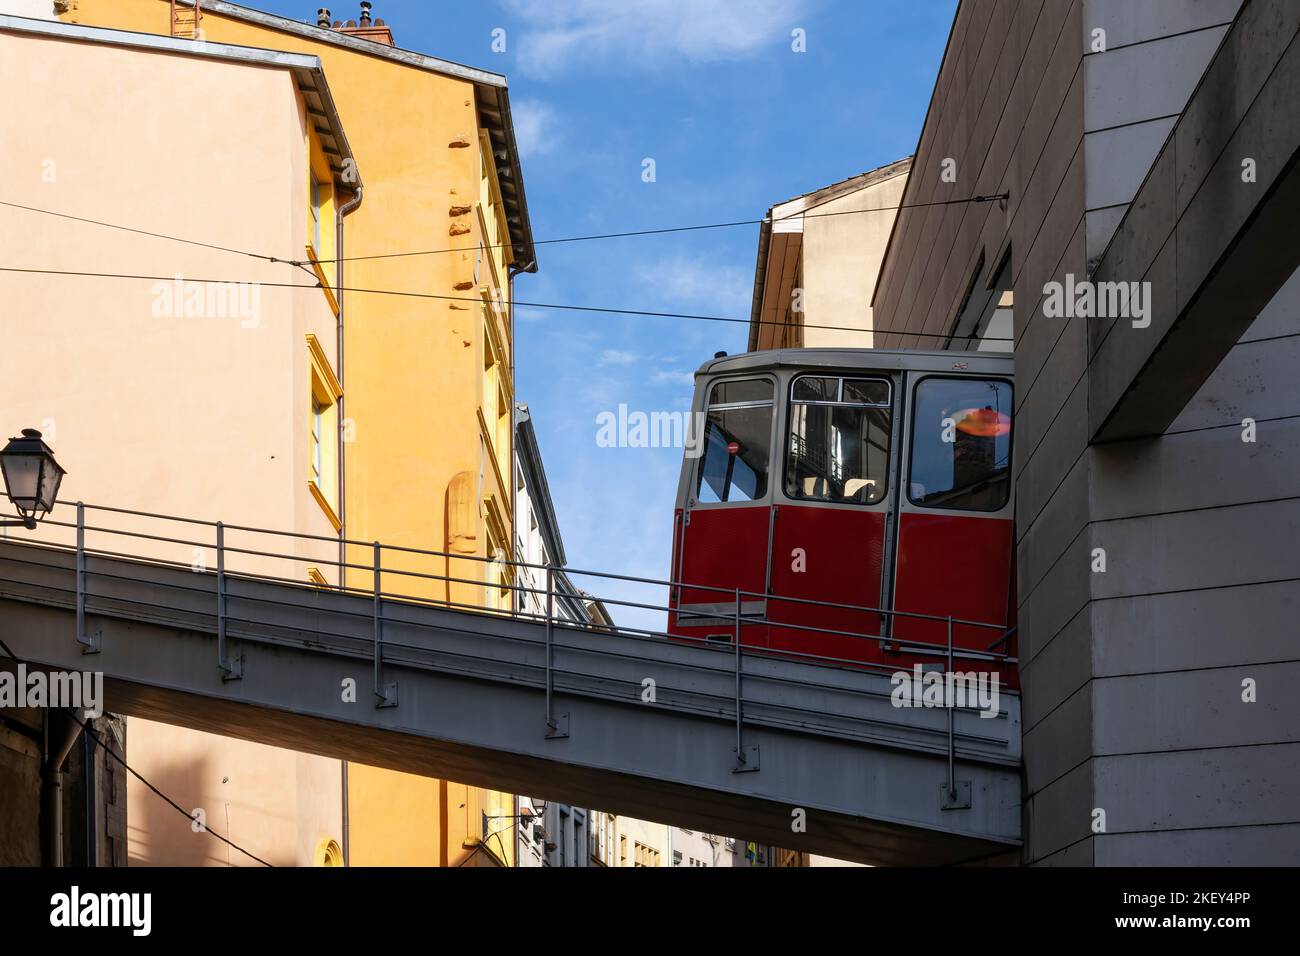 Red funicular in Lyon city, France Stock Photo